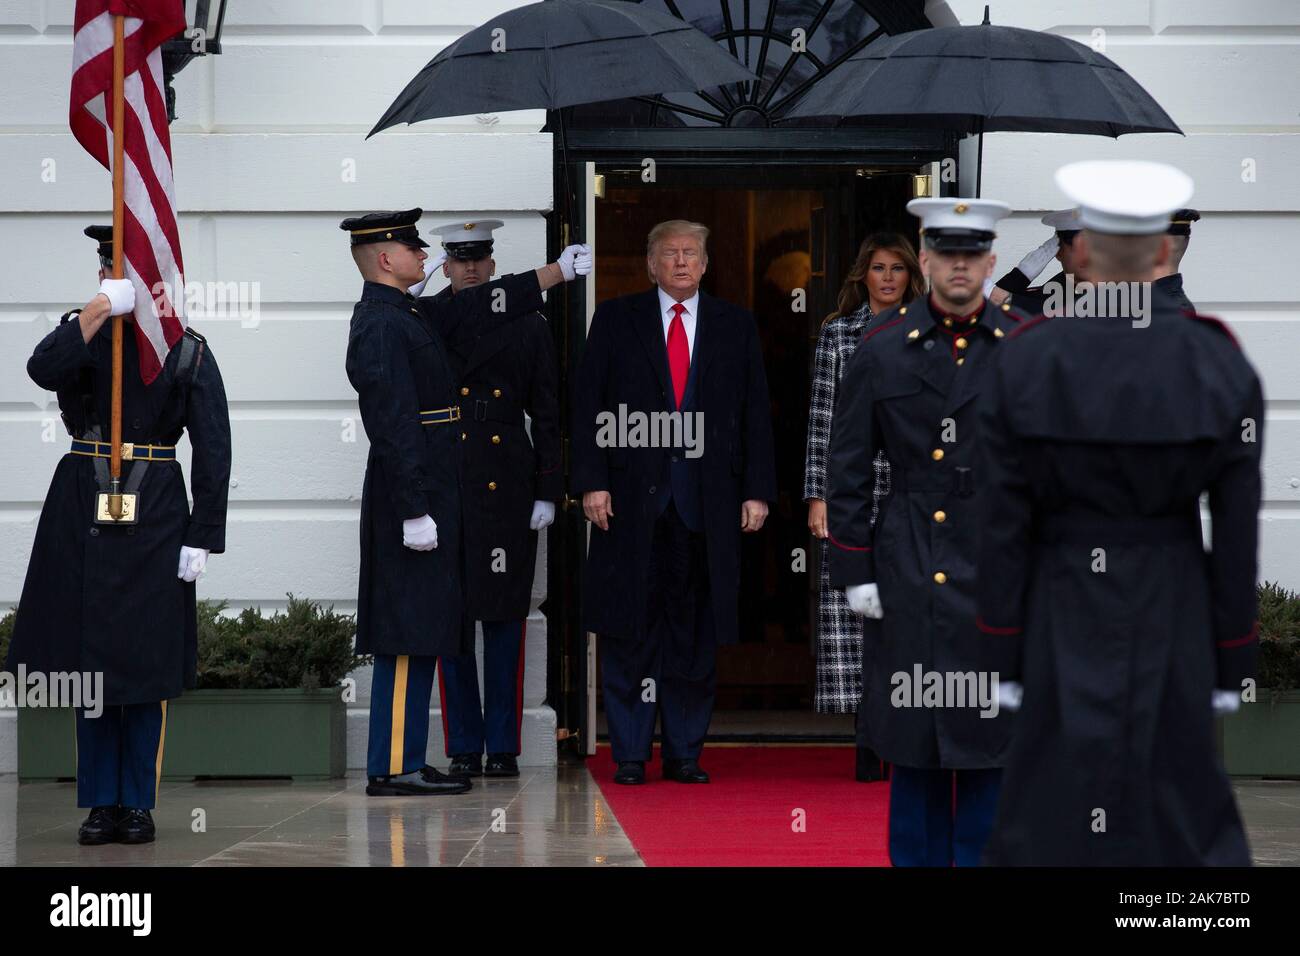 Washington, DC, USA. 7th Jan, 2020. United States President Donald J.  Trump, center left, and First lady Melania Trump, center right, await the  arrival of the Prime Minister of Greece Kyriakos Mitsotakis